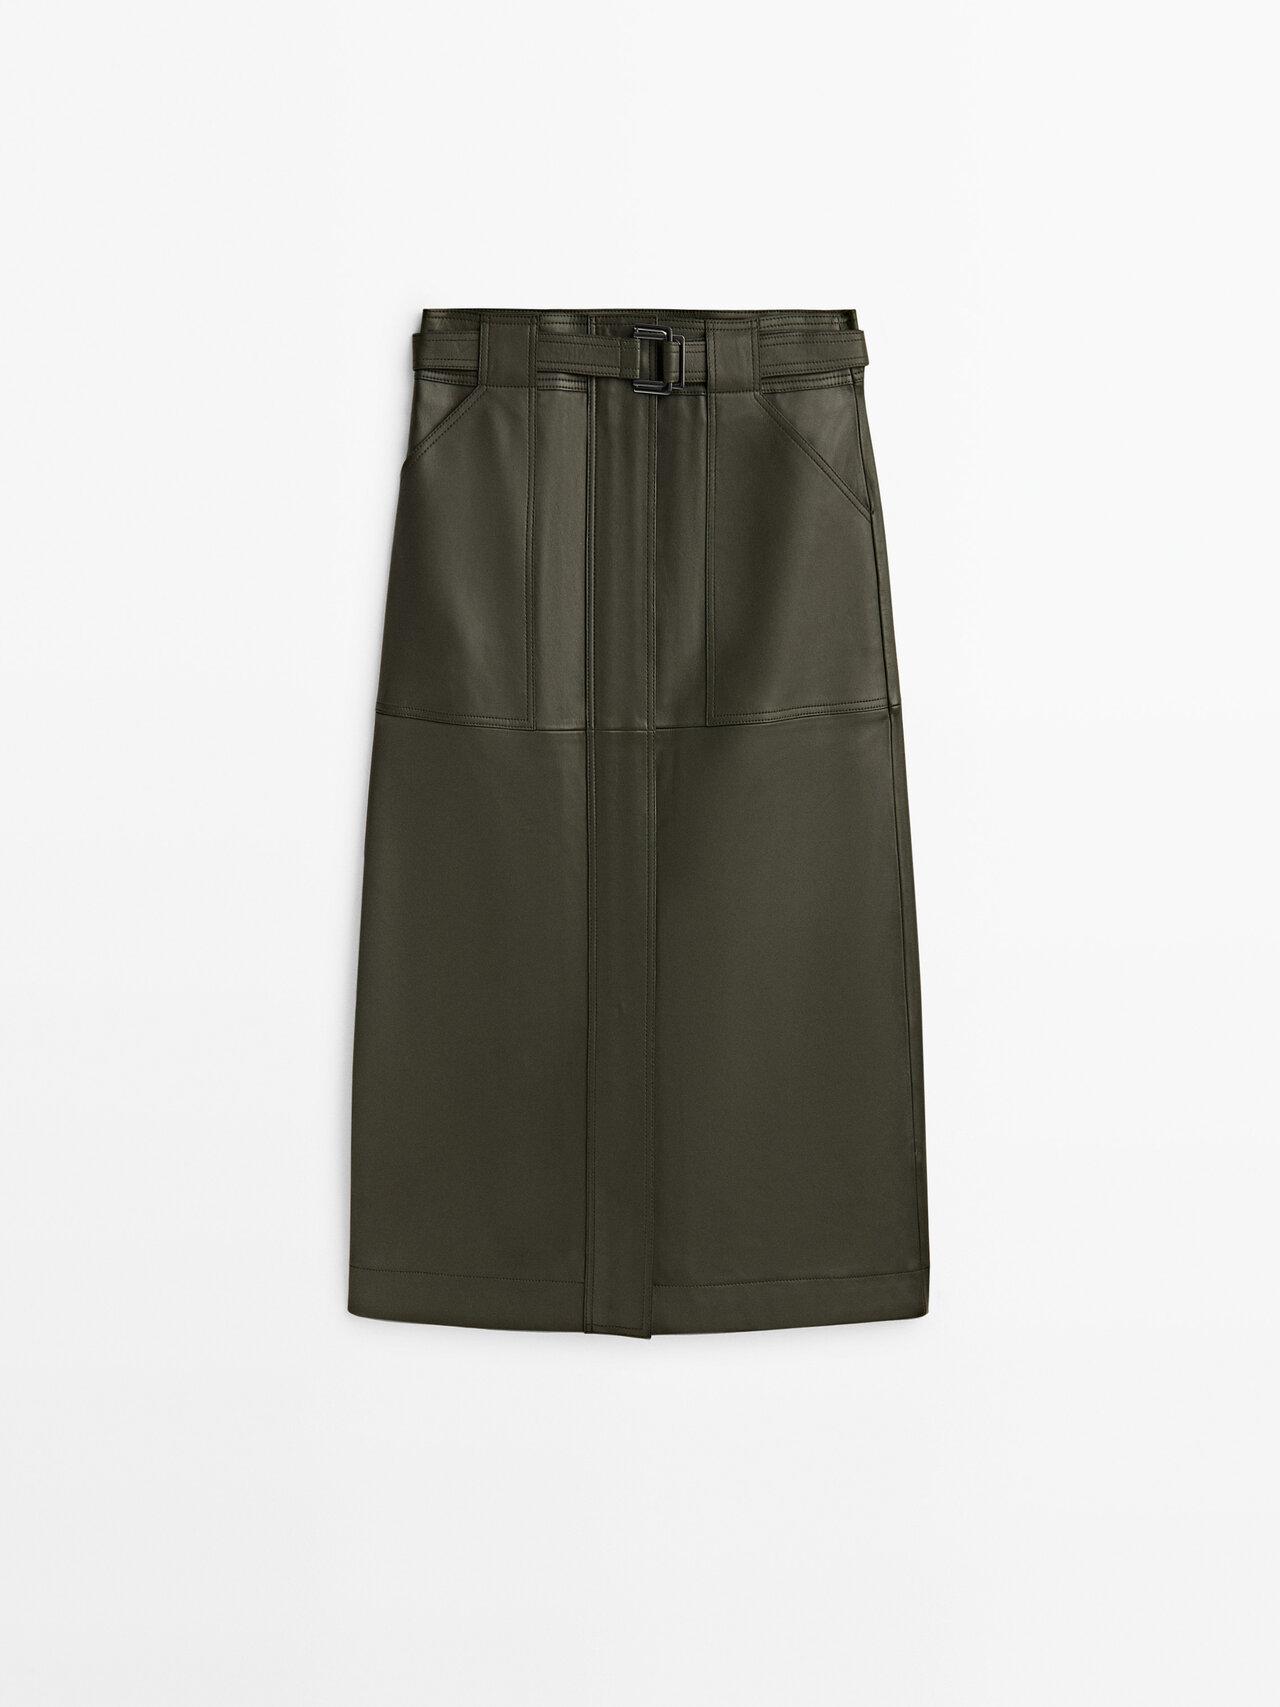 MASSIMO DUTTI Nappa Leather Skirt With Pockets in Green | Lyst